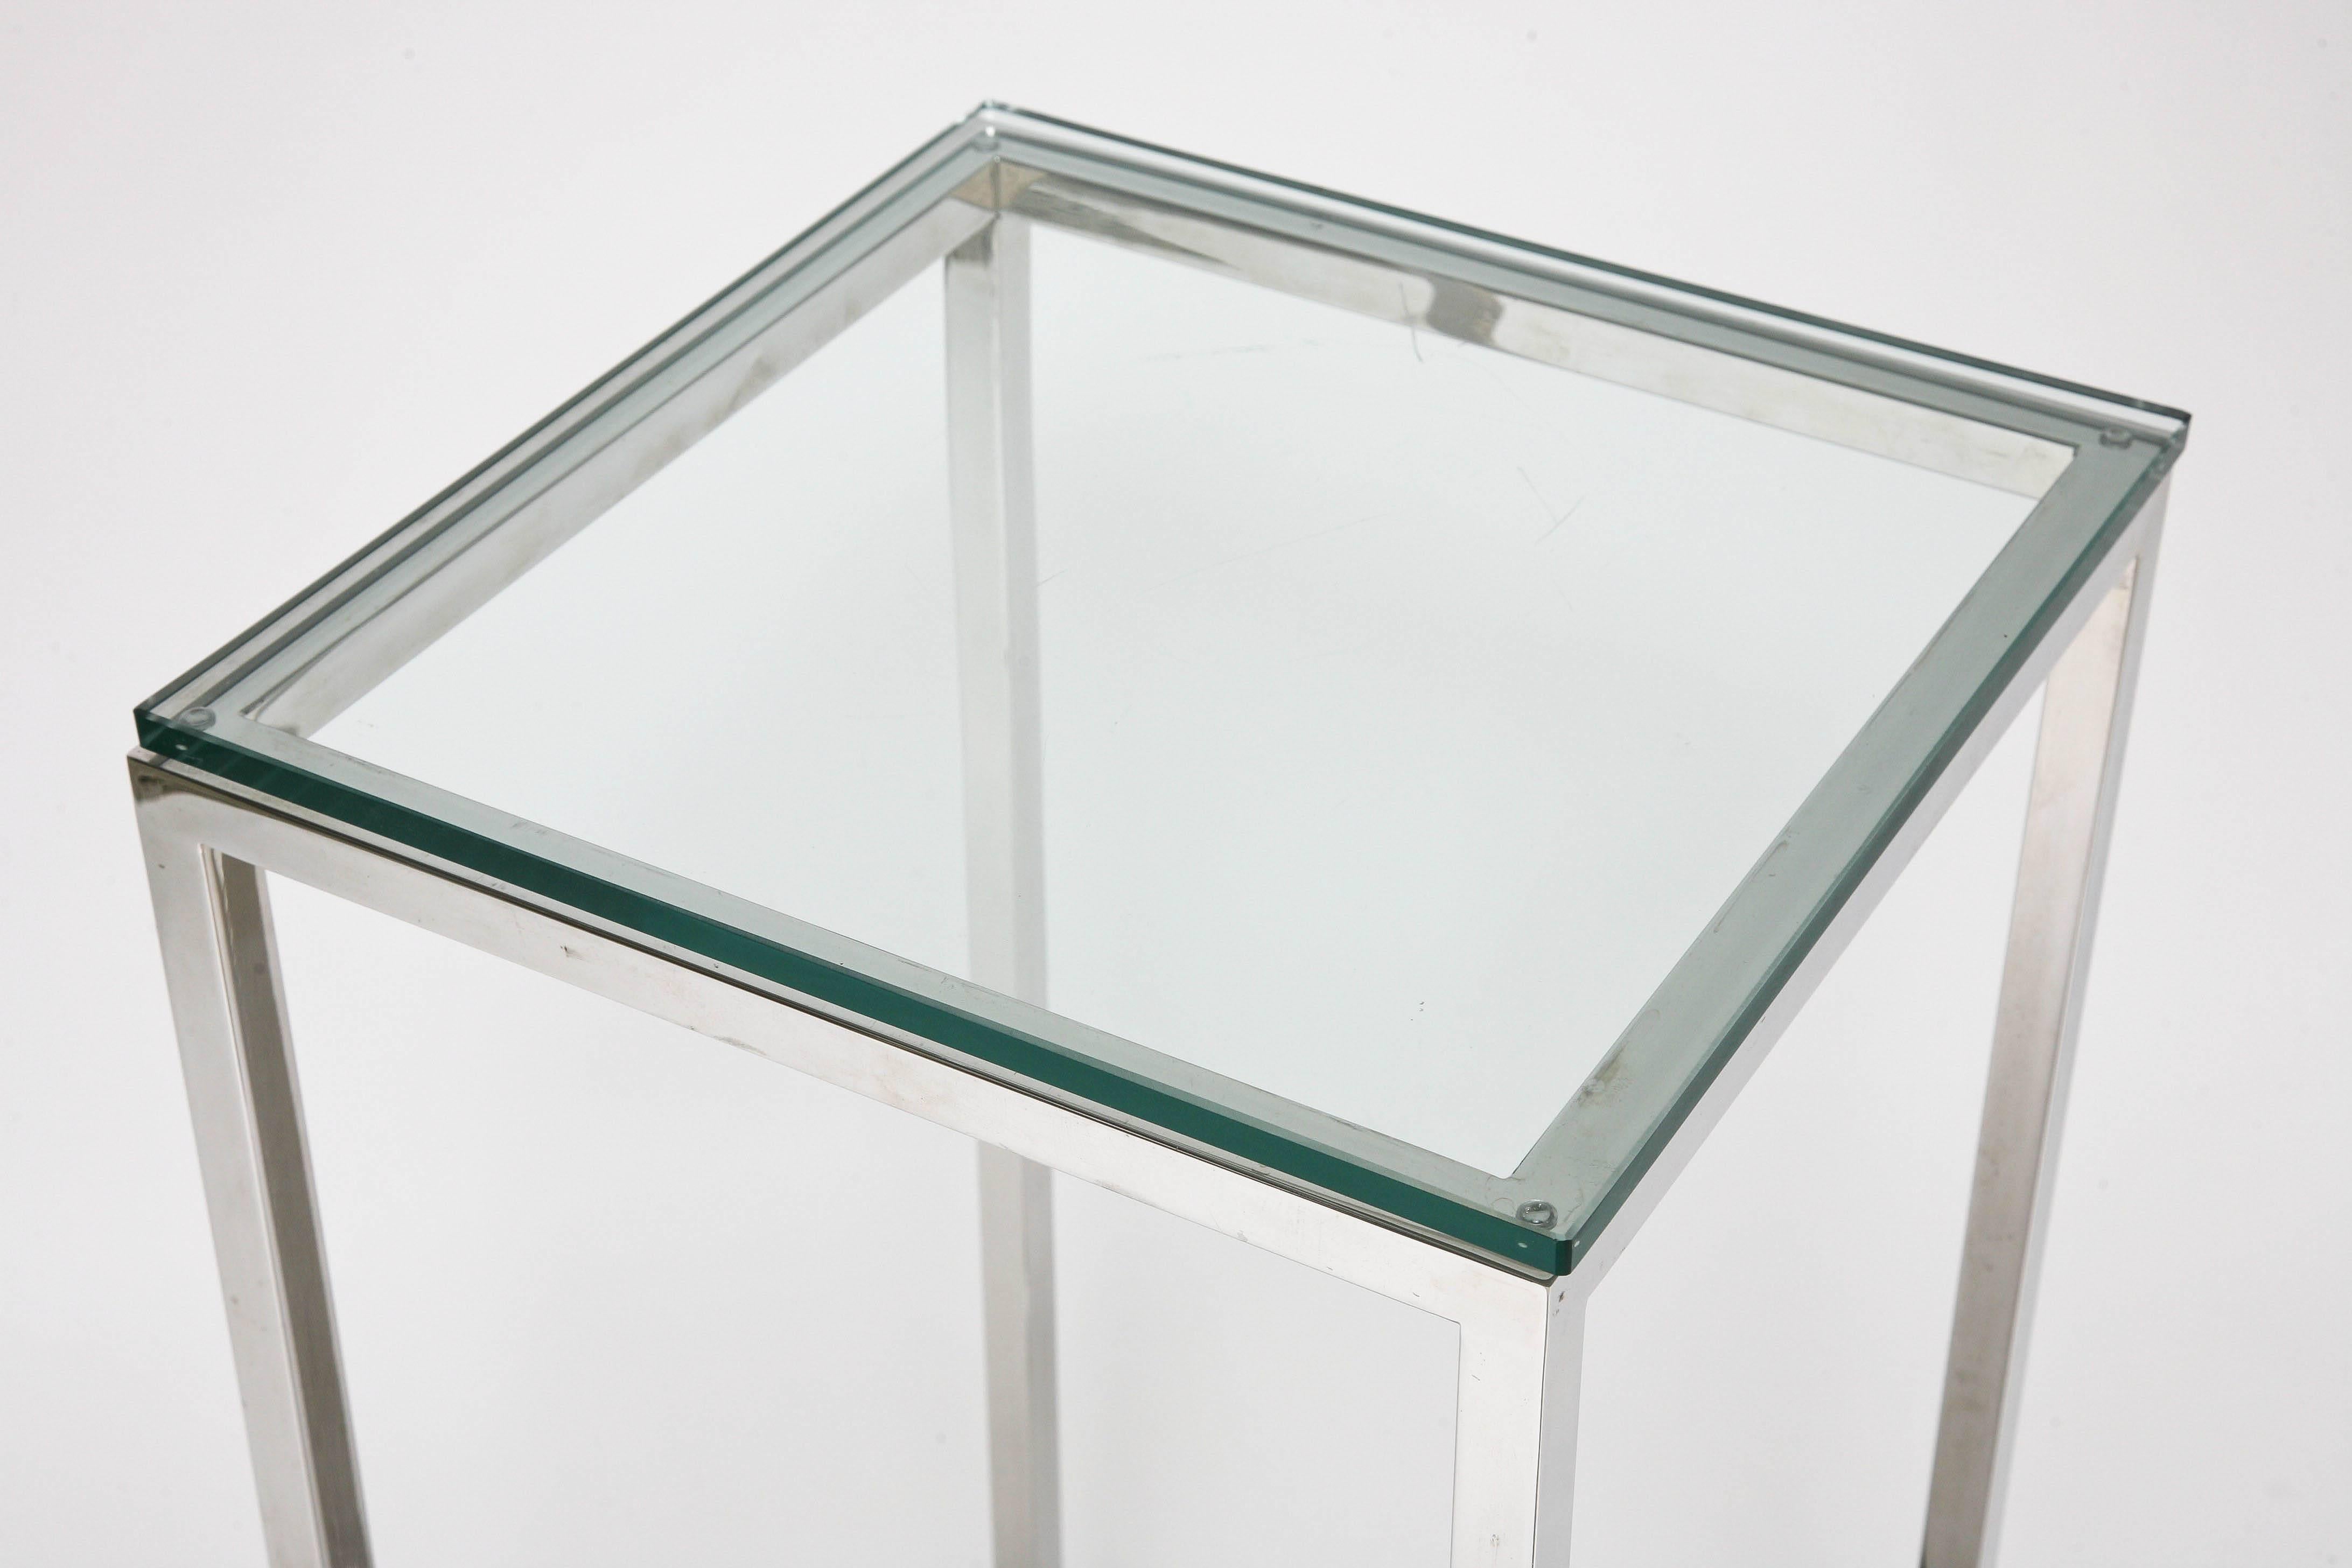 20th Century Polished Chrome and Glass Square Pedestal, Thin-Line by Milo Baughman